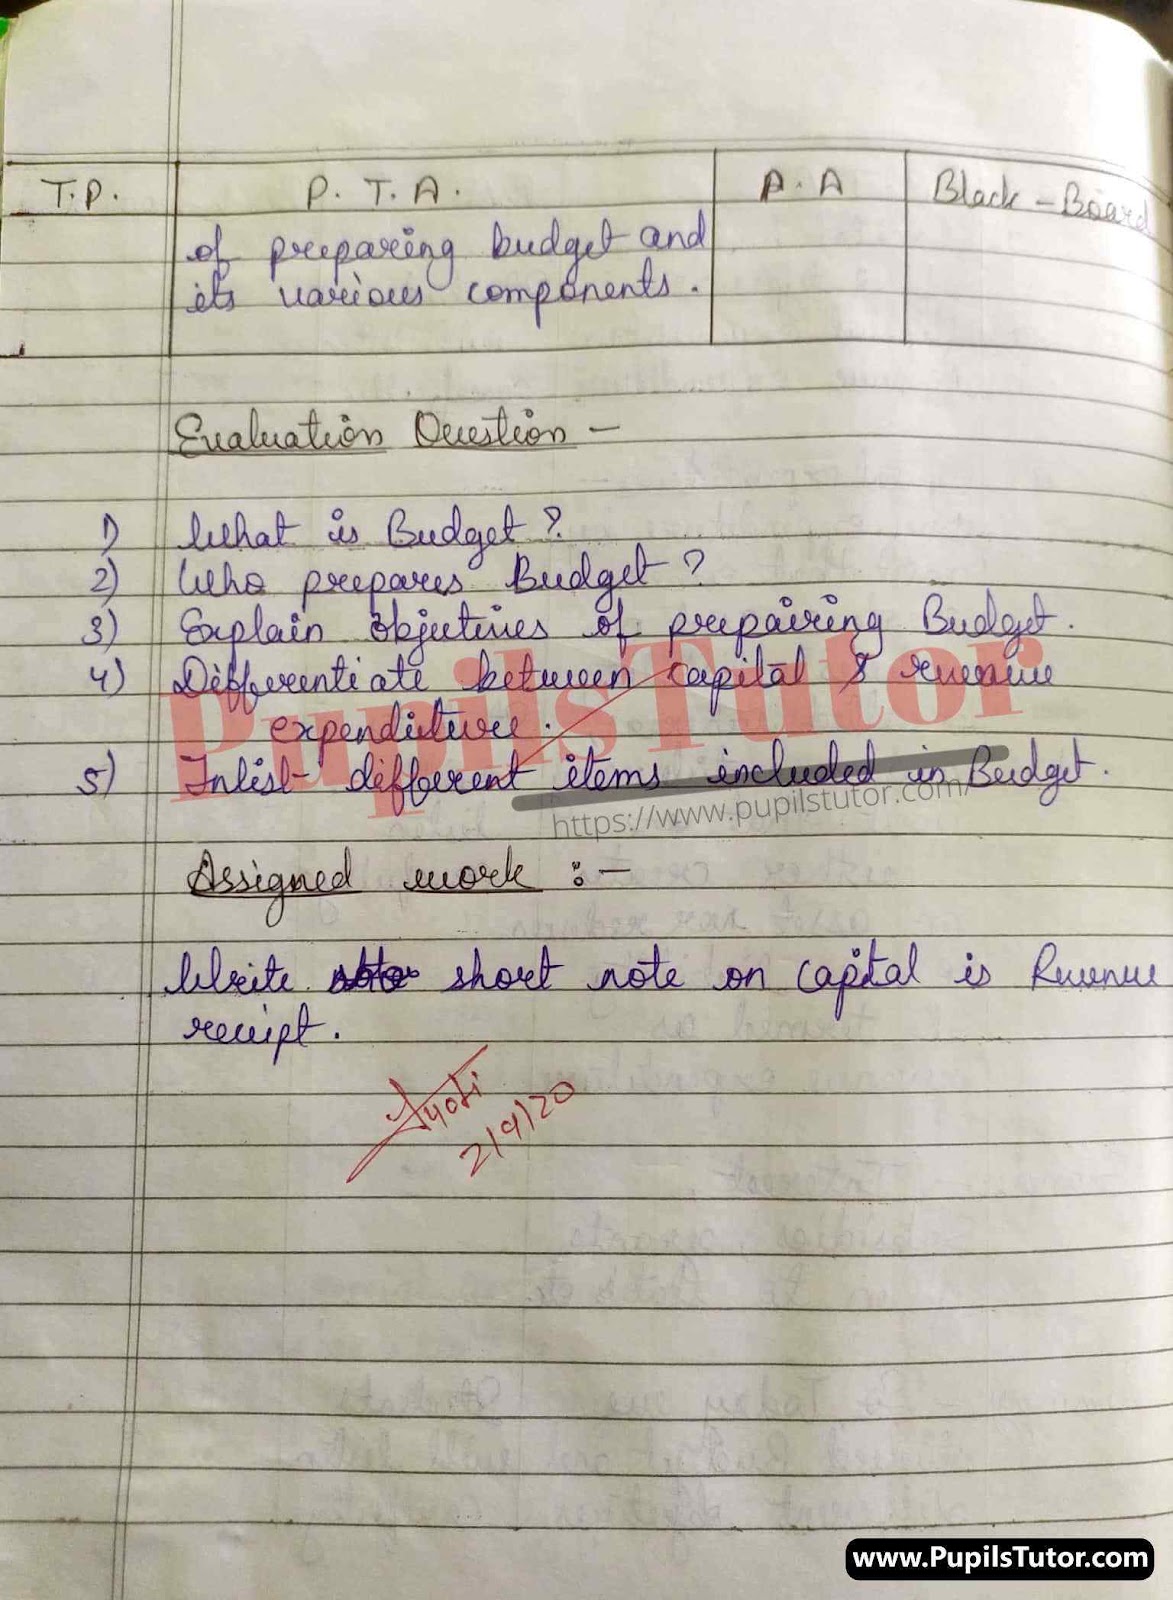 Lesson Plan On Budget For Class 11 To 12th.  – [Page And Pic Number 5] – https://www.pupilstutor.com/